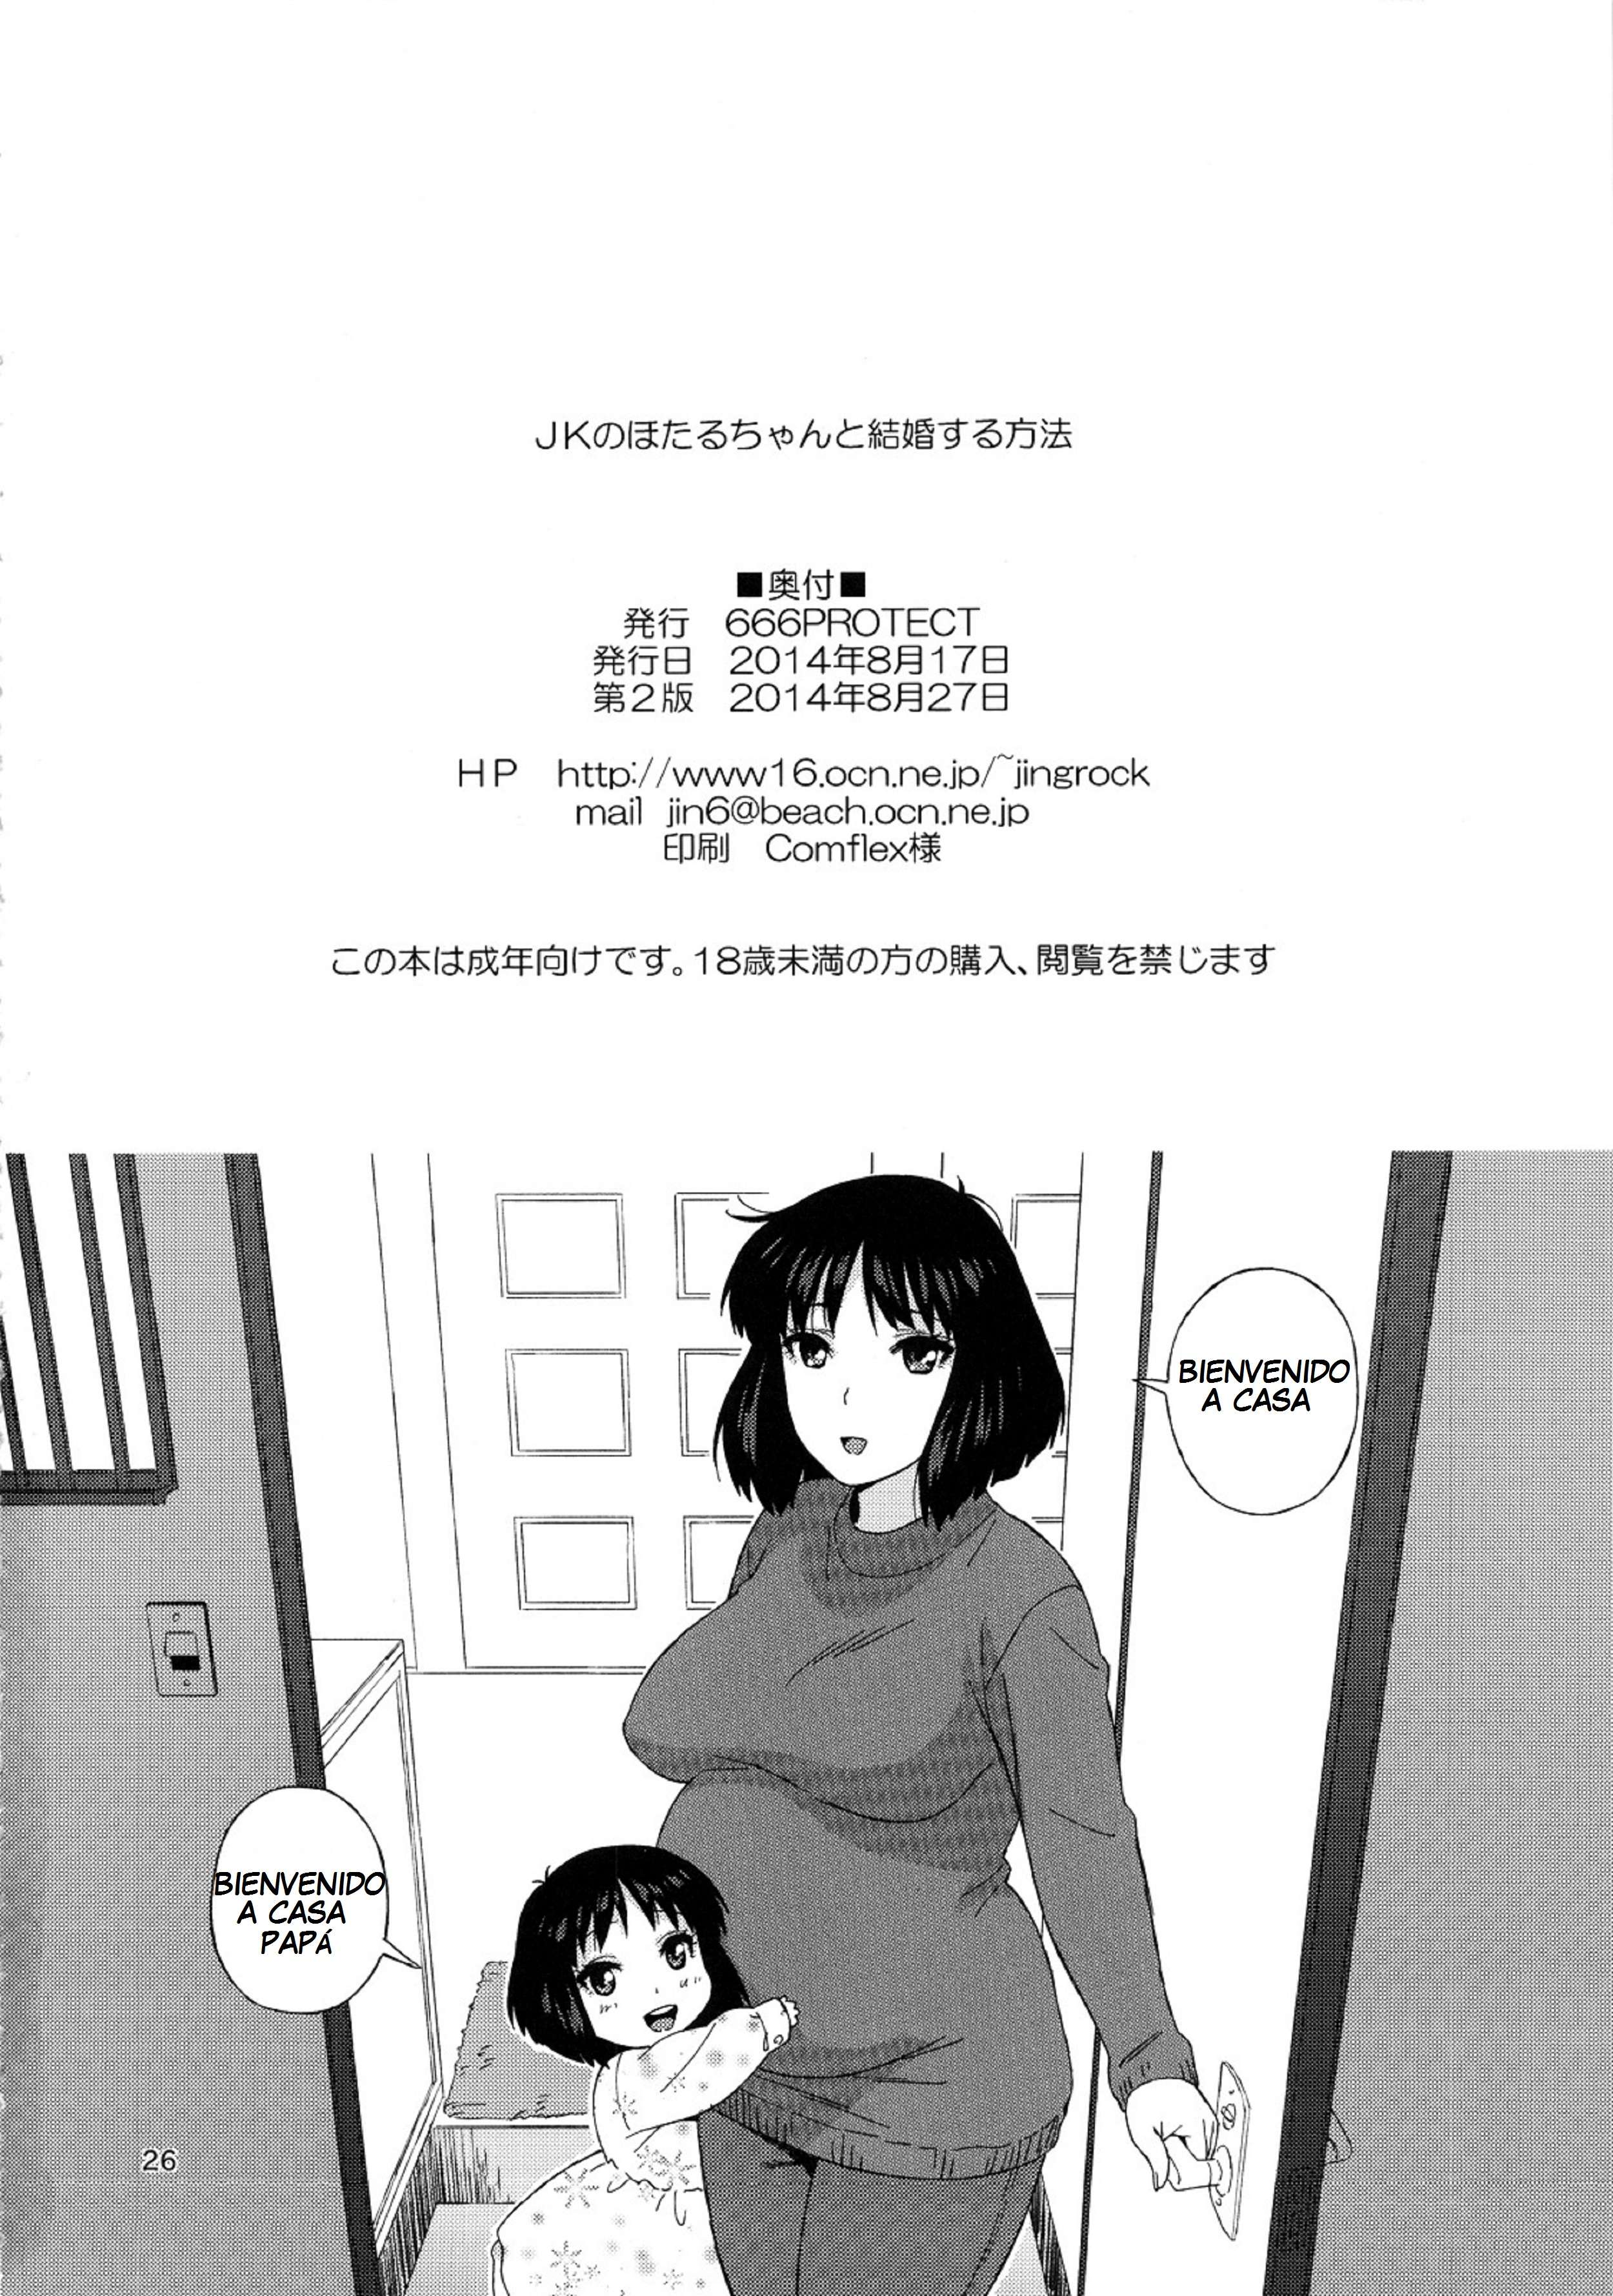 A Method to Marry Hotaru-chan the JK Chapter-1 - 24